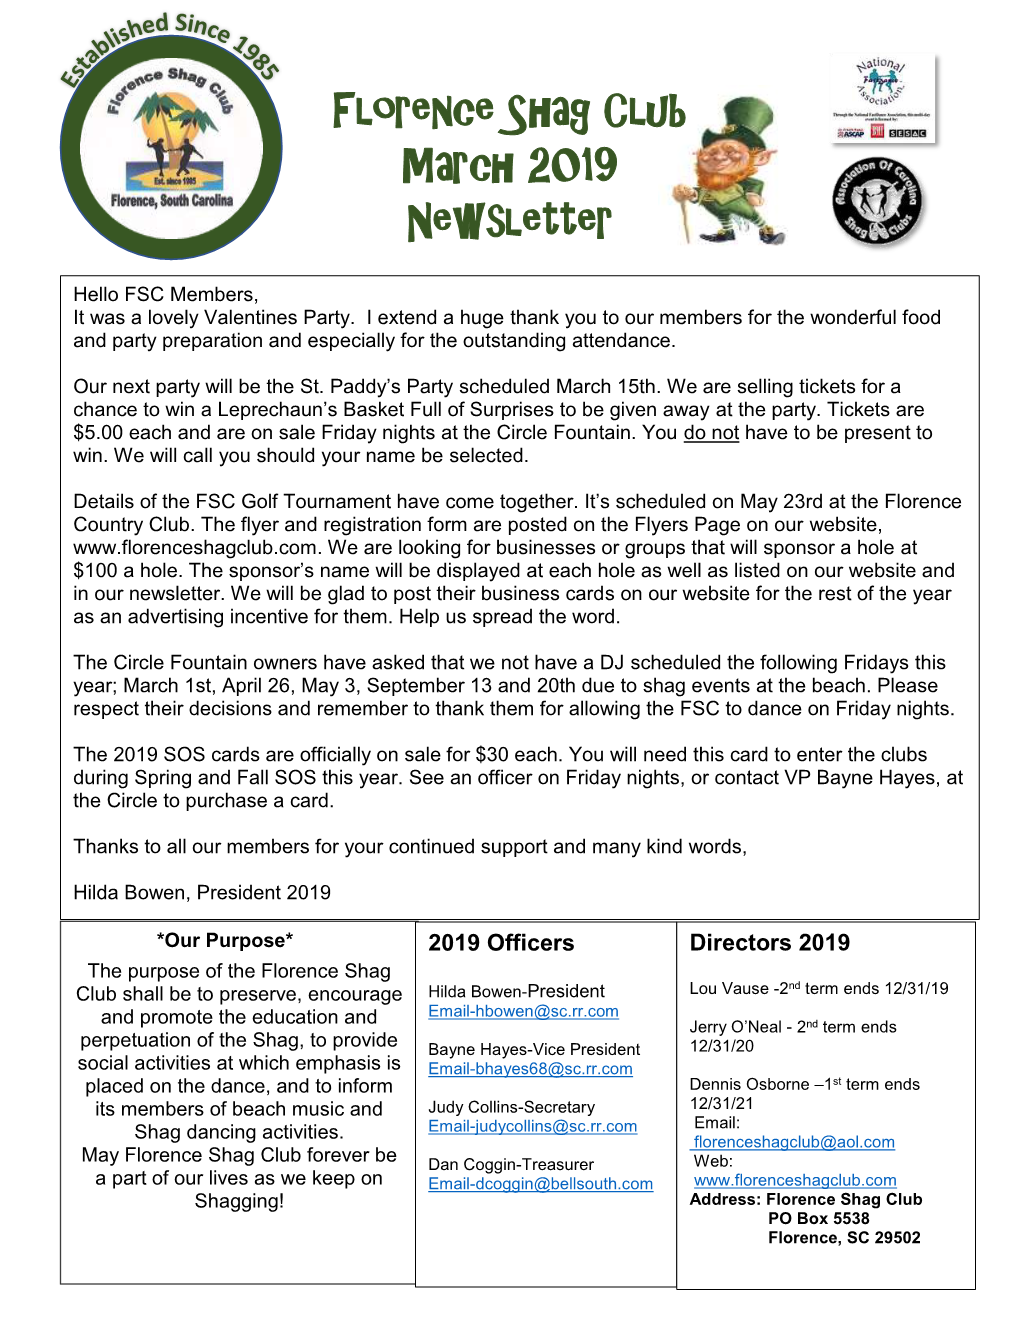 Florence Shag Club March 2019 Newsletter